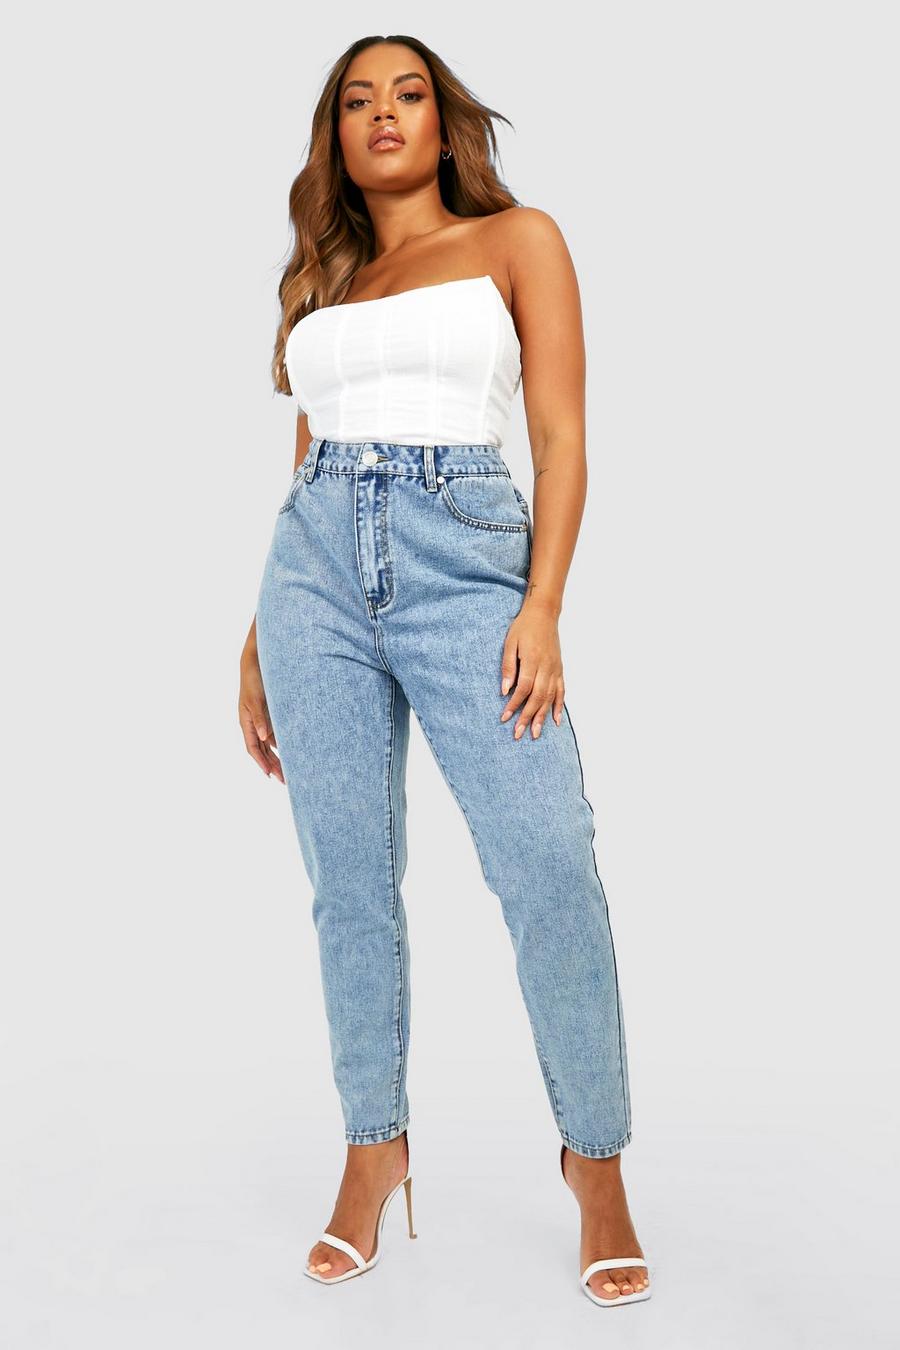 Plus Size Mom Jeans, Plus Size High Waisted Mom Jeans